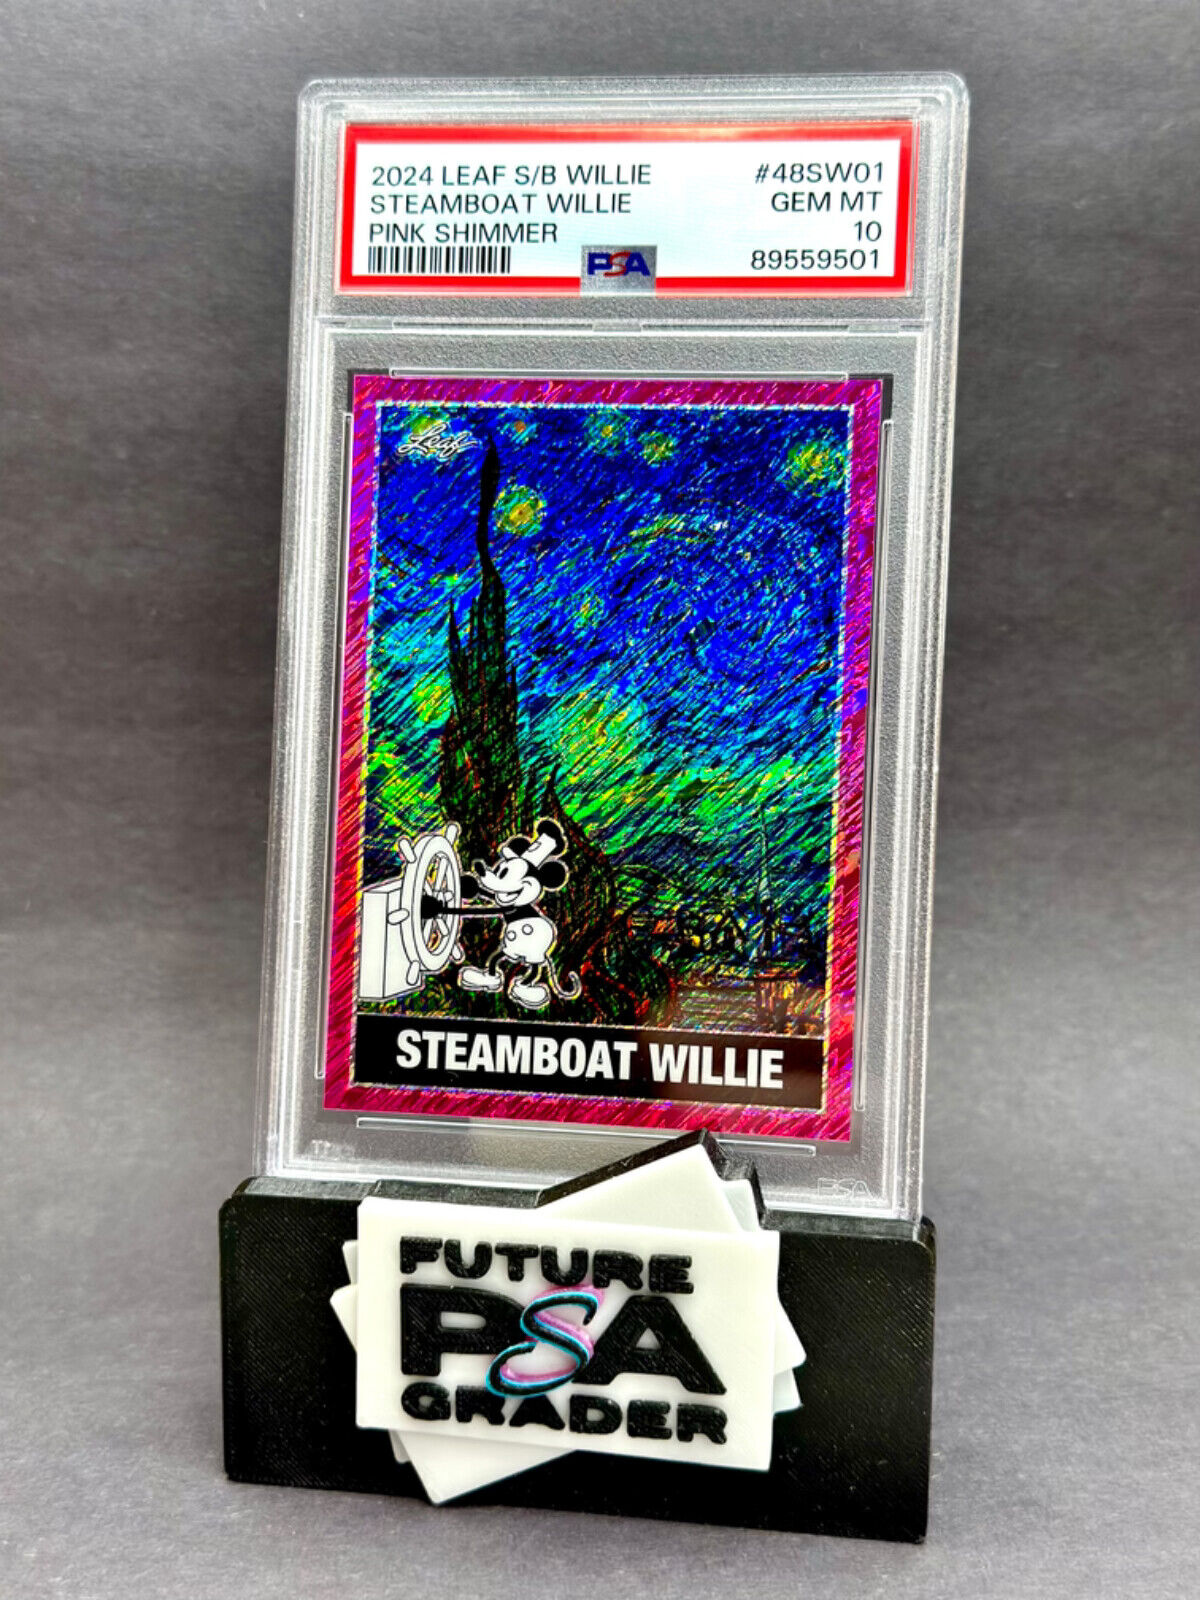 PSA 10 Starry Night Steamboat Willie Pink Shimmer 5/7 Mickey Mouse Leaf #48SW-01